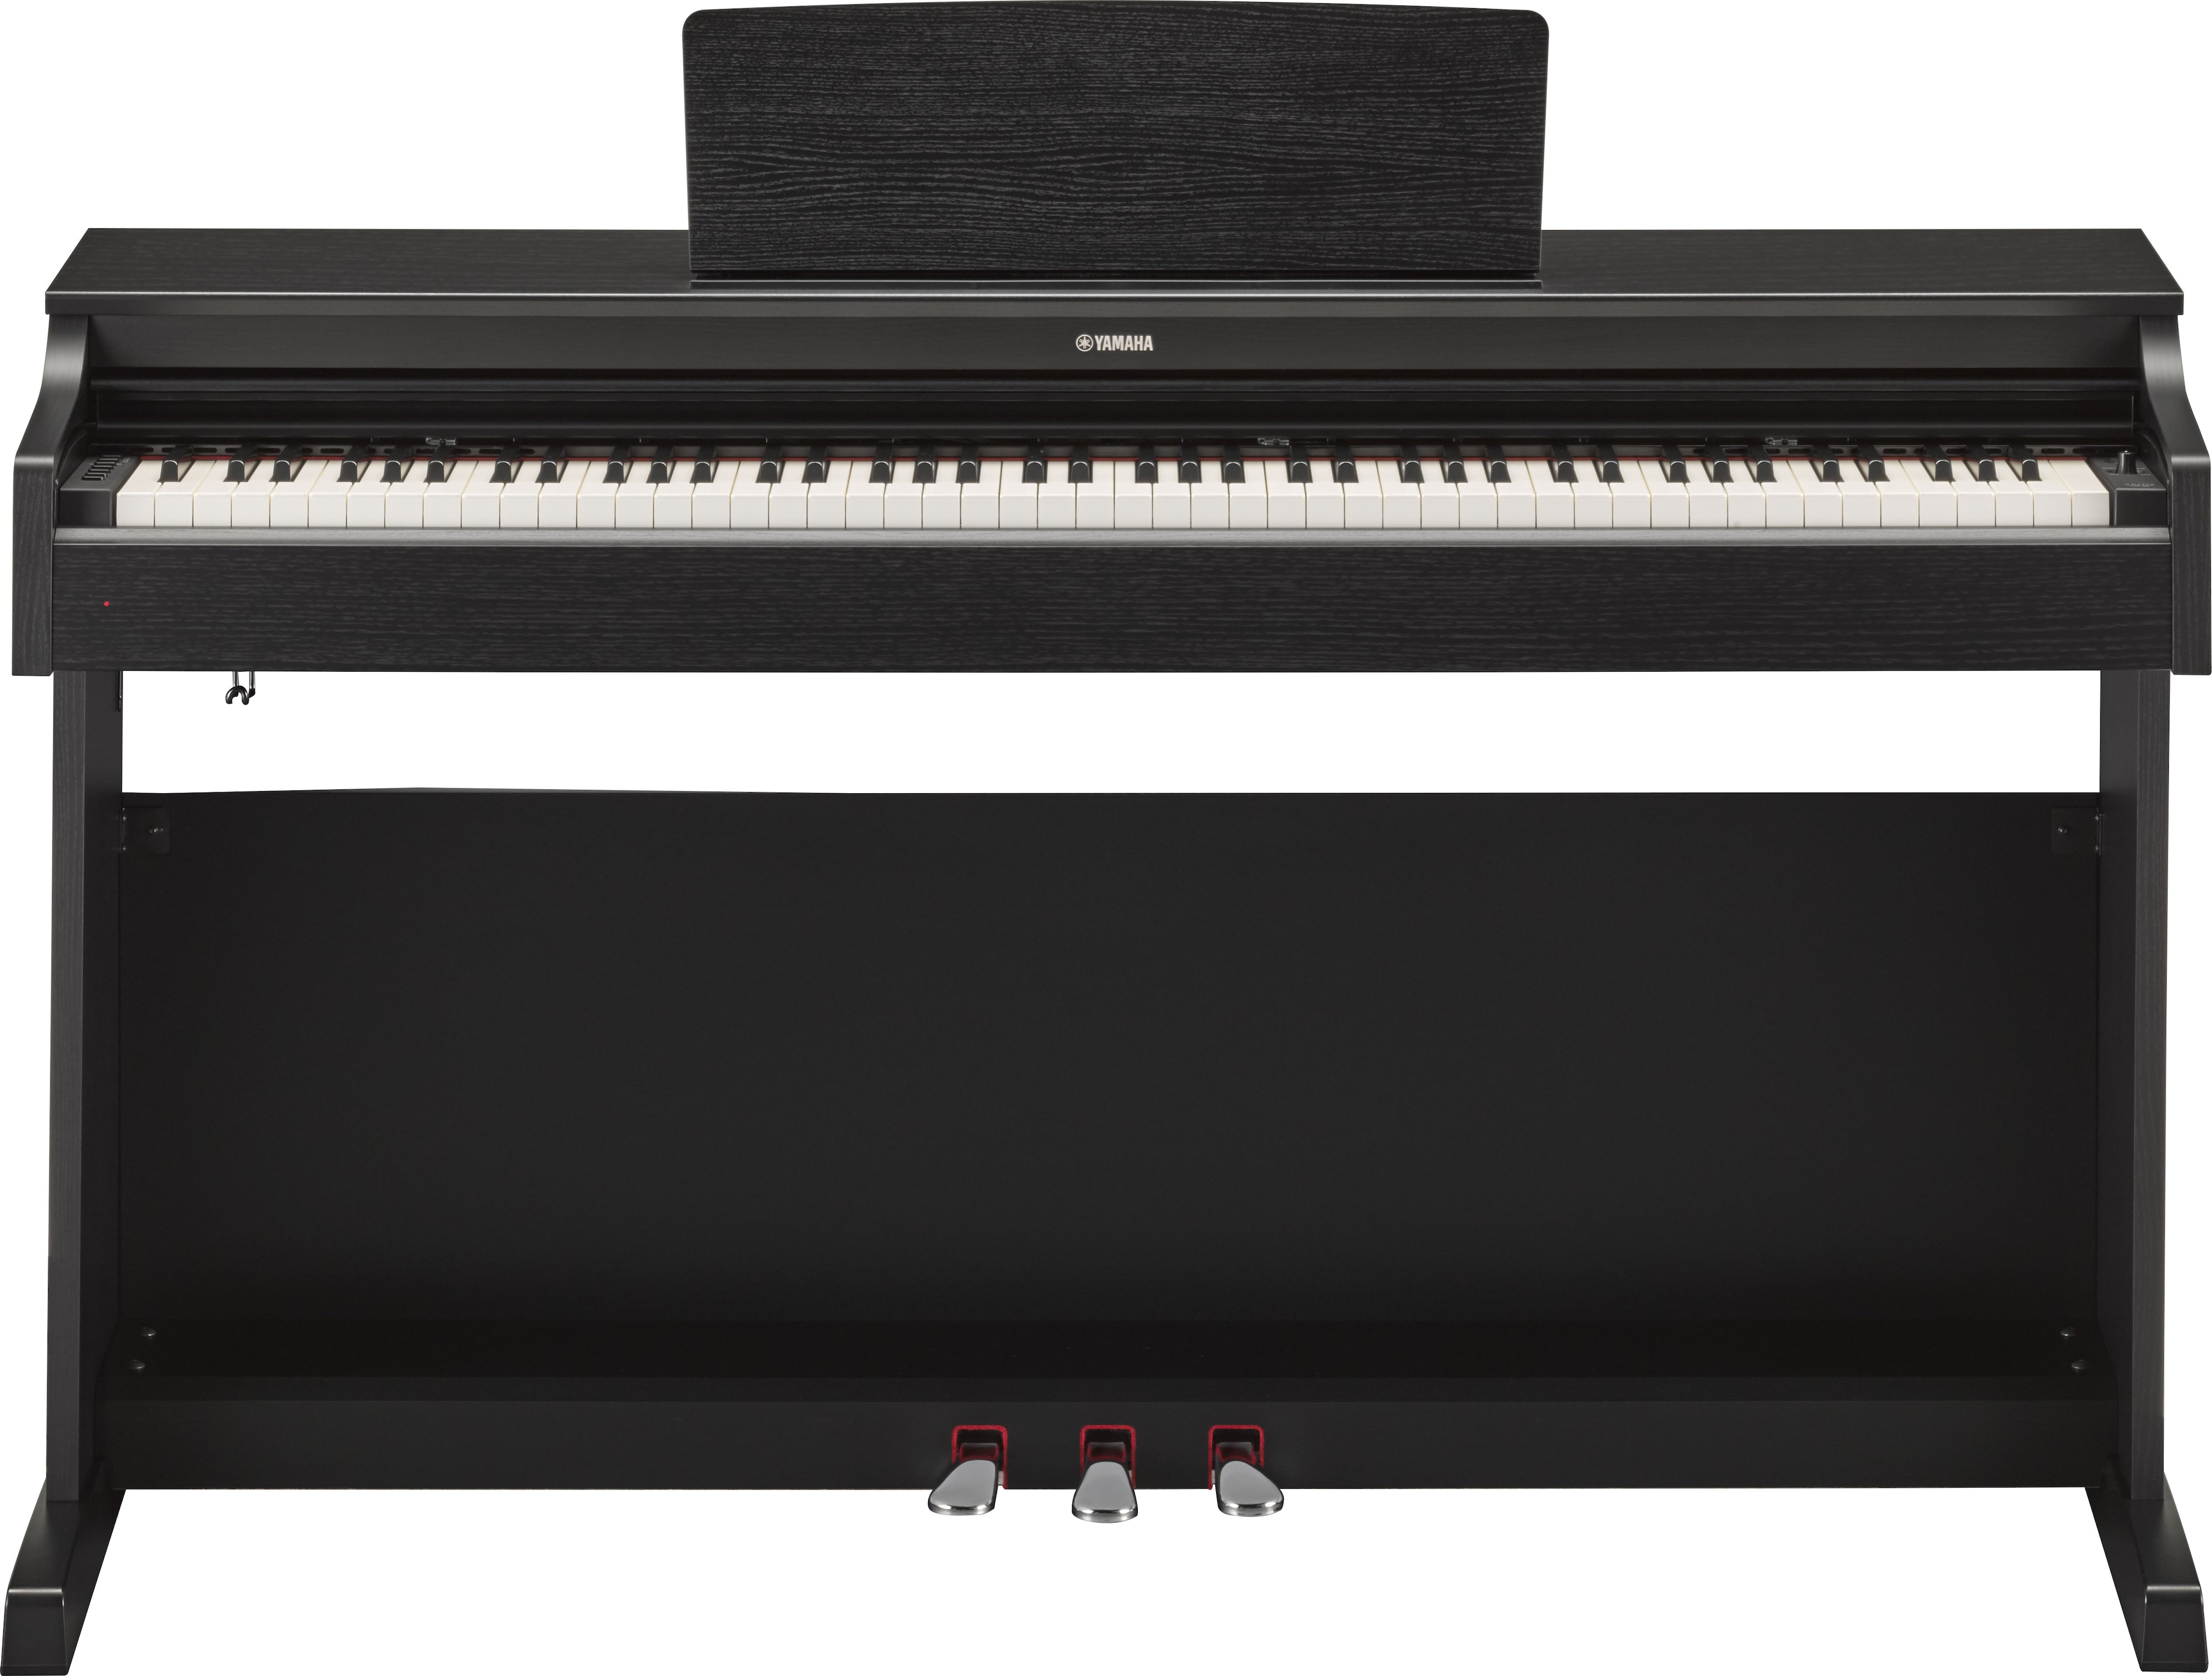 YDP-163 - Overview - ARIUS - Pianos - Musical Instruments